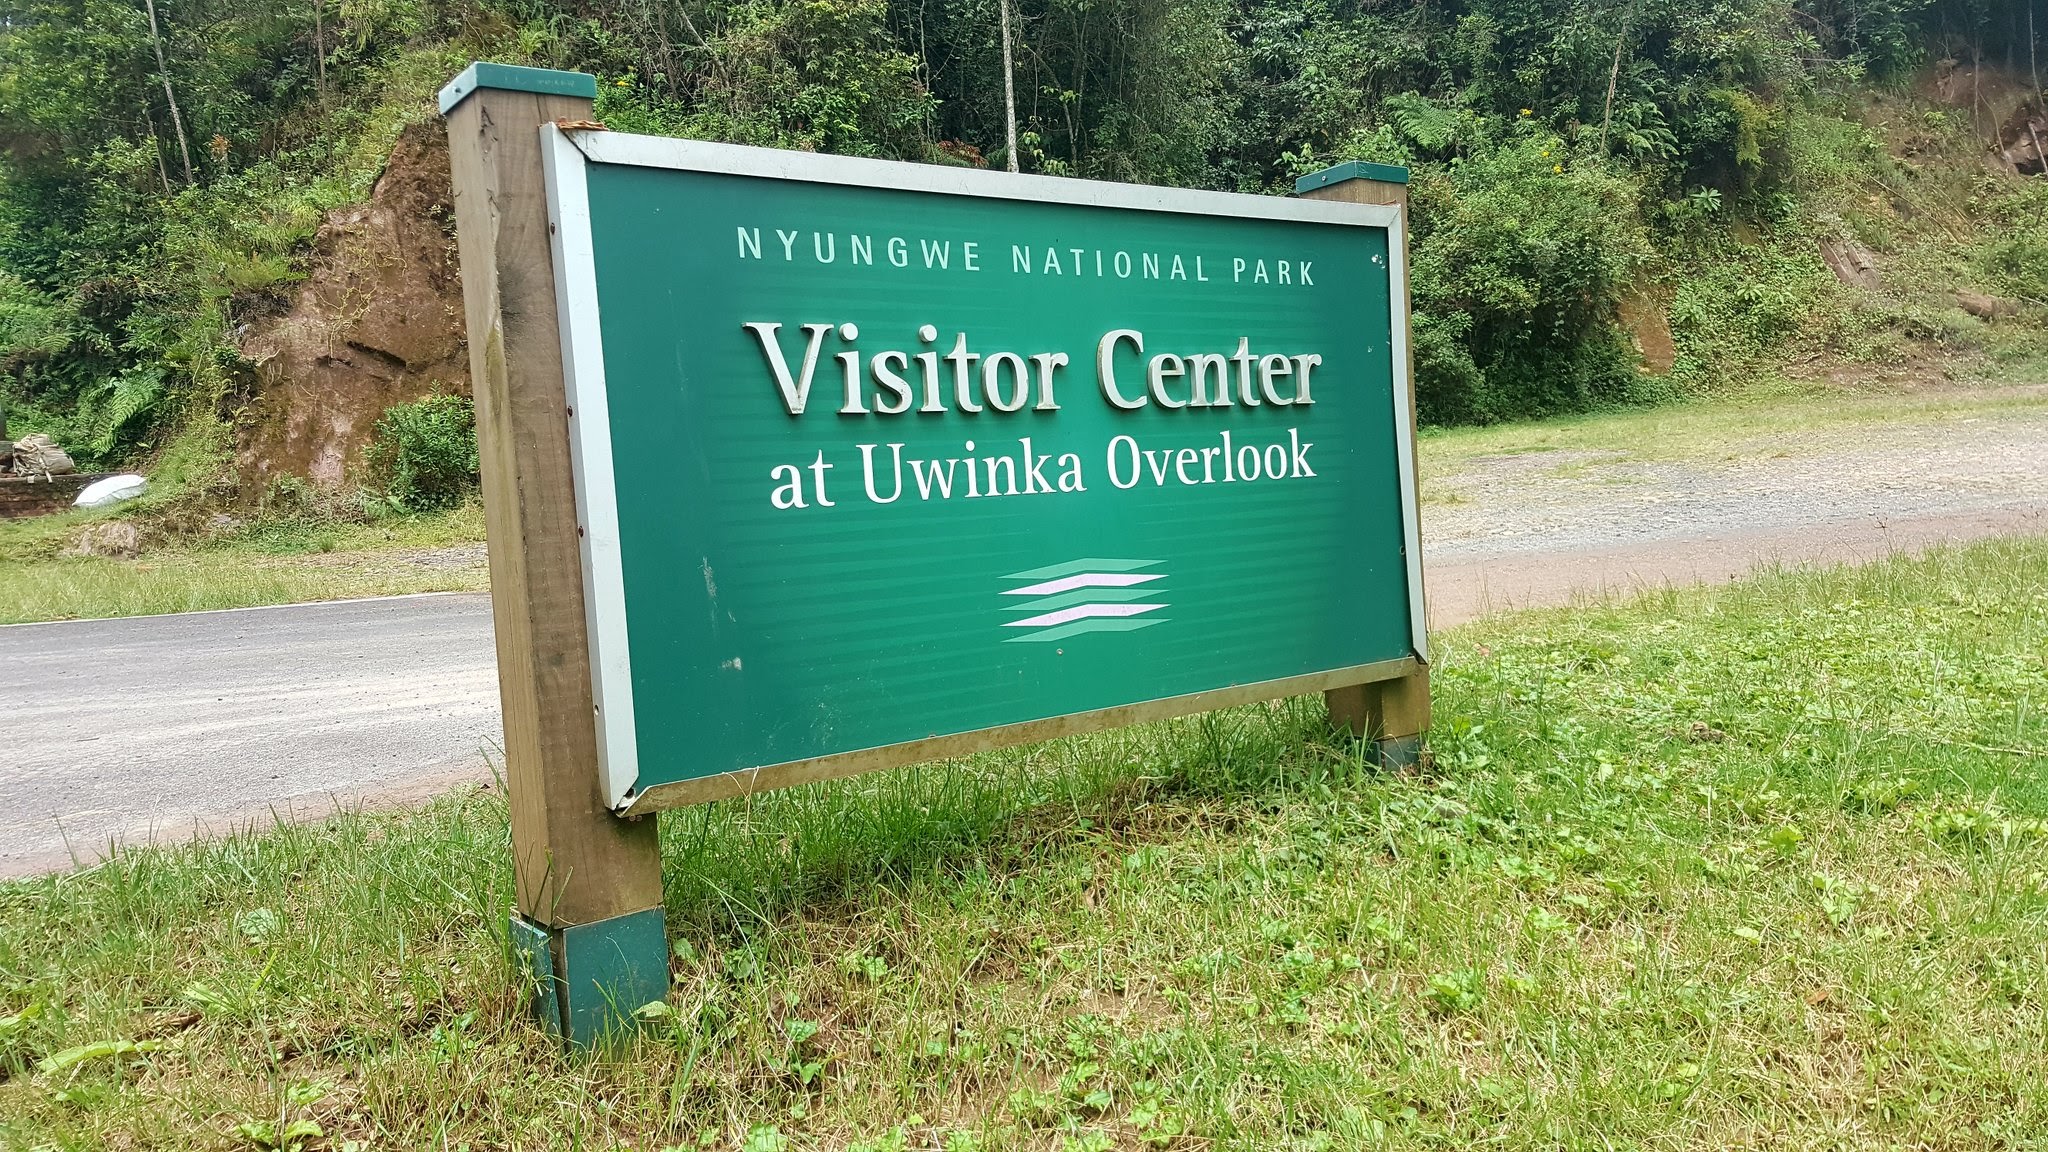 Nyungwe National Park, one of Rwanda's most treasured natural wonders, with Car Rentals Rwanda. Whether you're behind the wheel on a self-drive quest or prefer the enriching narratives of a guided holiday tour,